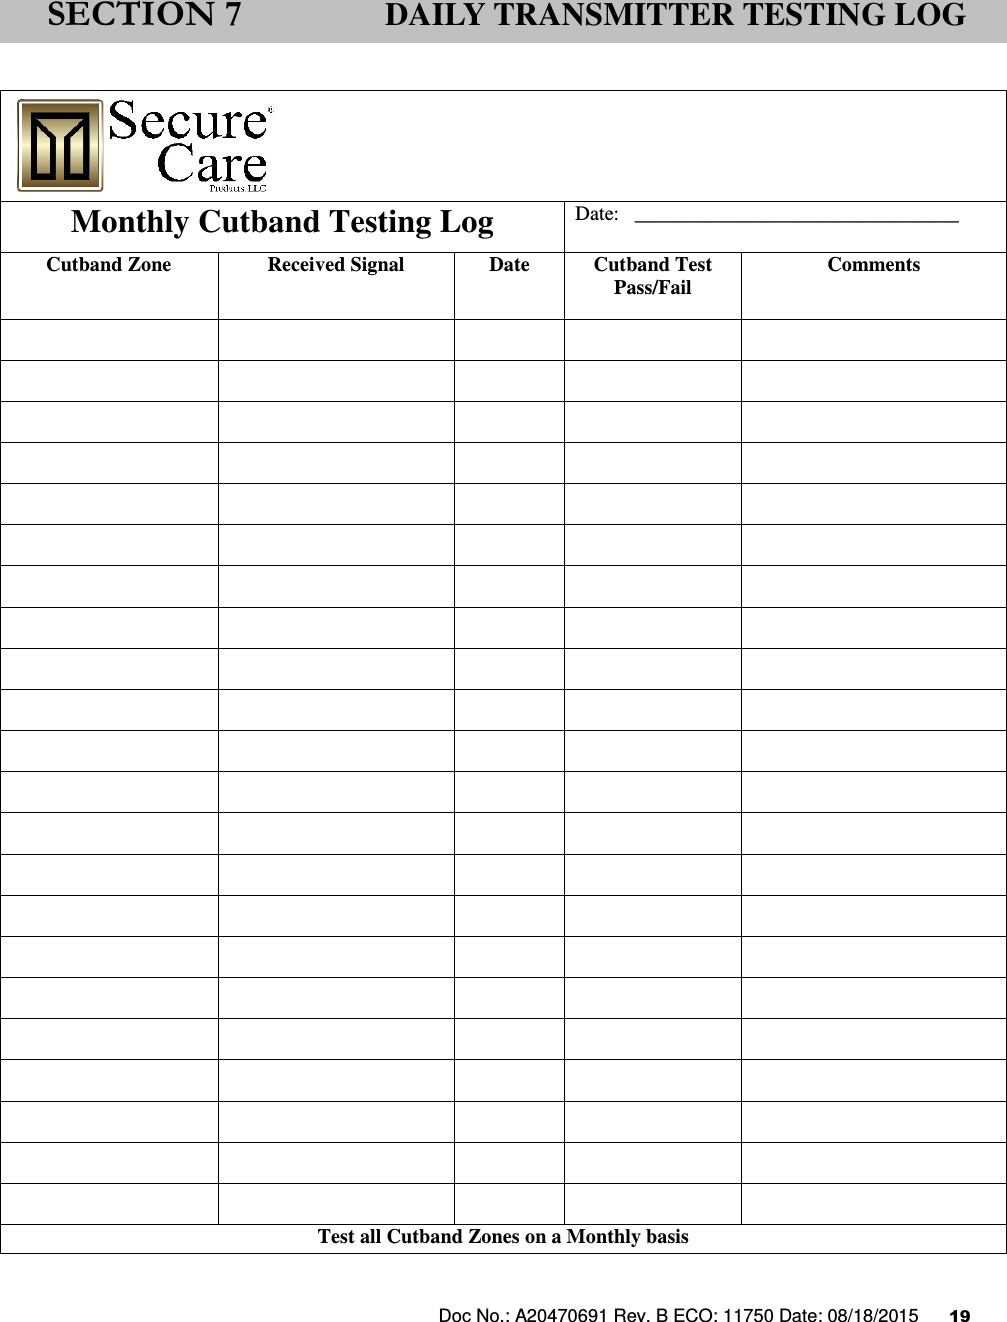 Doc No.: A20470691 Rev. B ECO: 11750 Date: 08/18/2015      19                       Monthly Cutband Testing Log  Date:   ________________________________ Cutband Zone  Received Signal  Date  Cutband Test Pass/Fail Comments                                                                                                                                                                                                                                                                                                                     Test all Cutband Zones on a Monthly basis   SECTION 7 DAILY TRANSMITTER TESTING LOG 